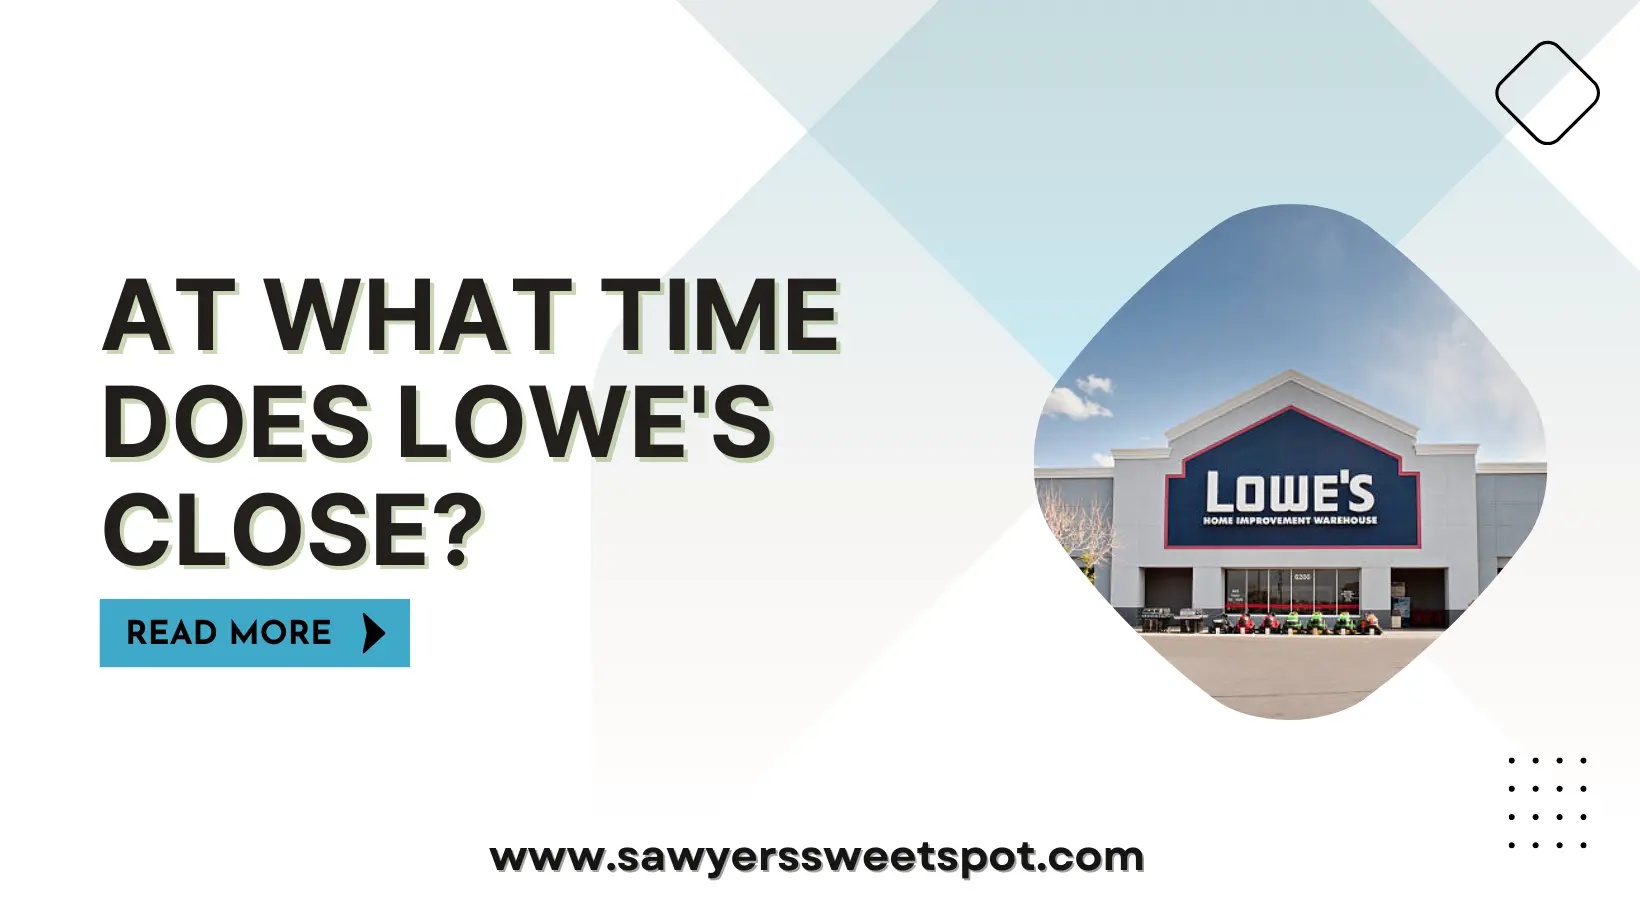 At What Time Does Lowe's Close?